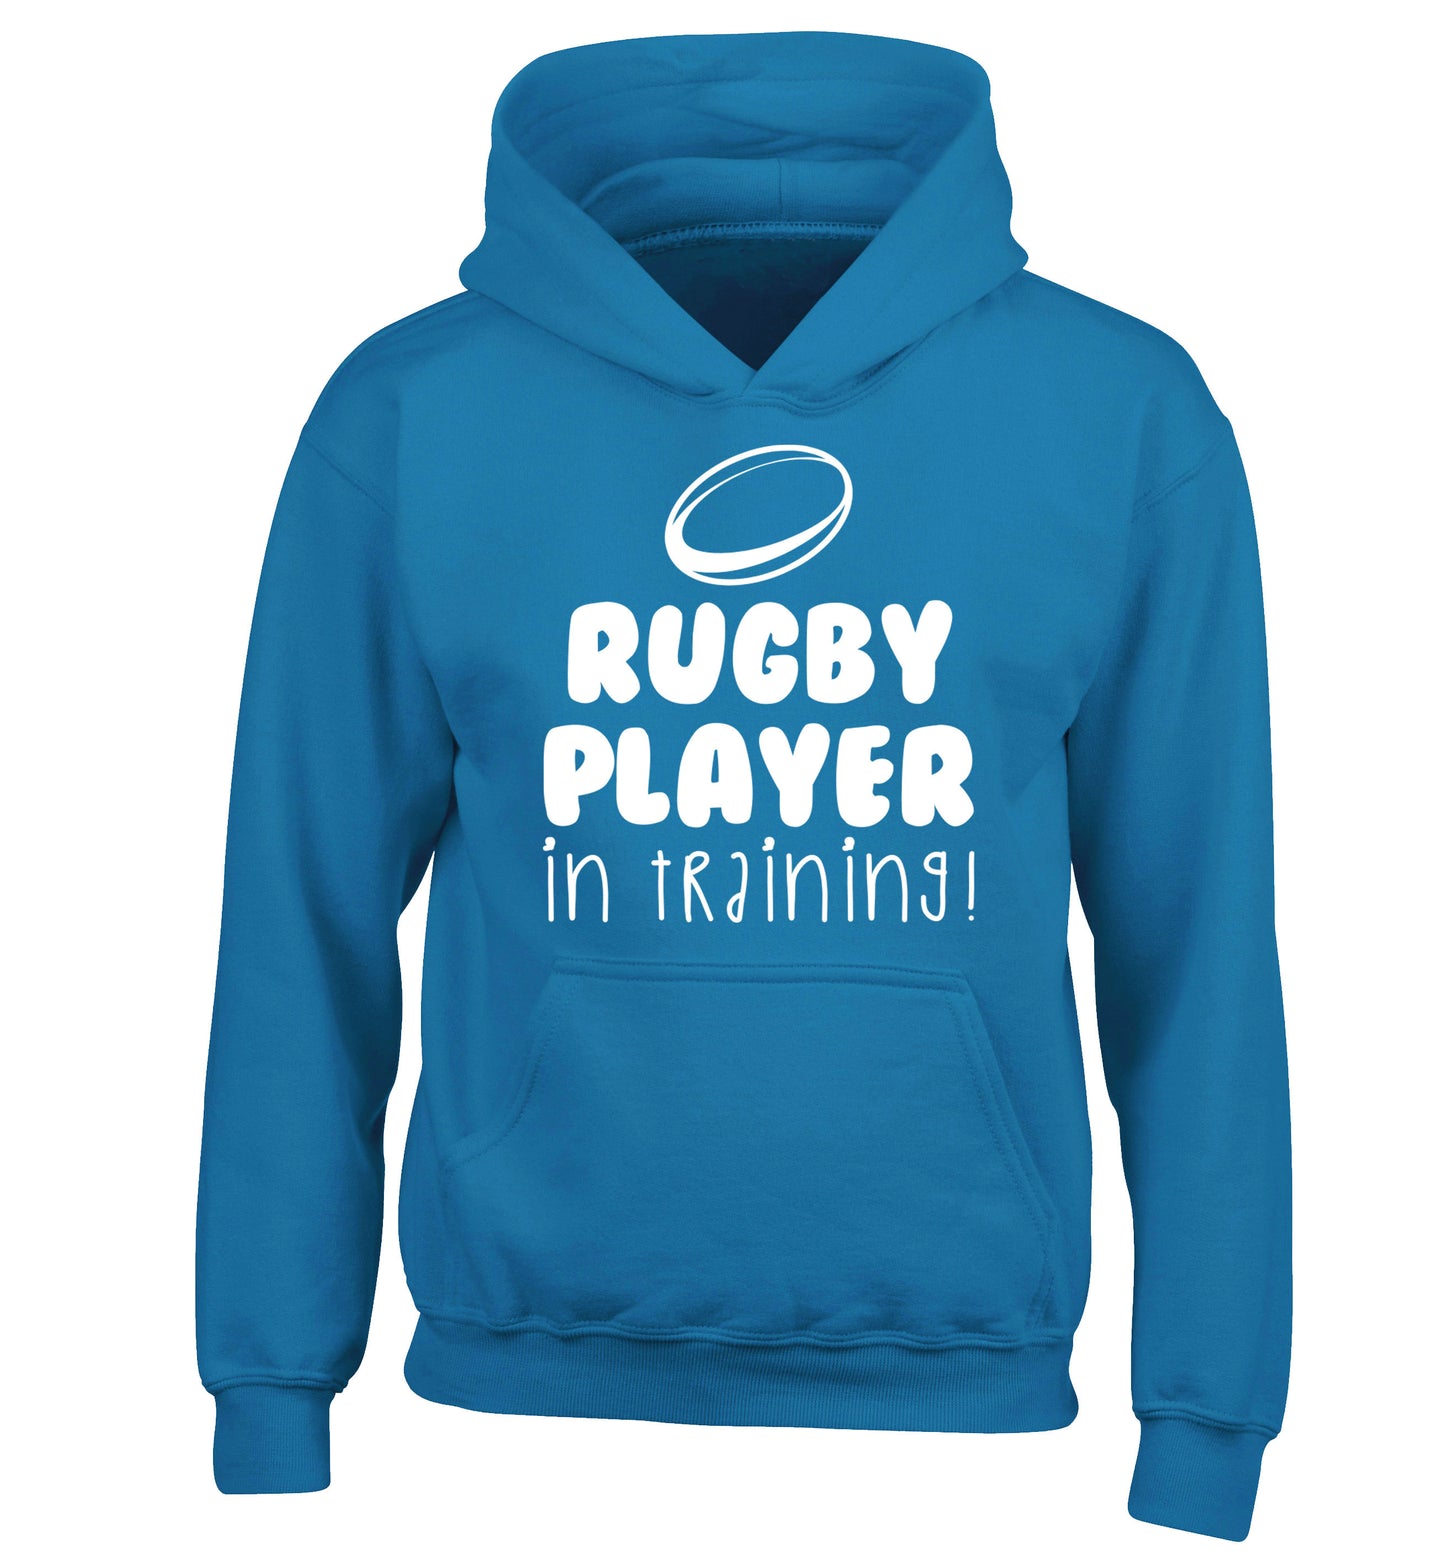 Rugby player in training children's blue hoodie 12-14 Years